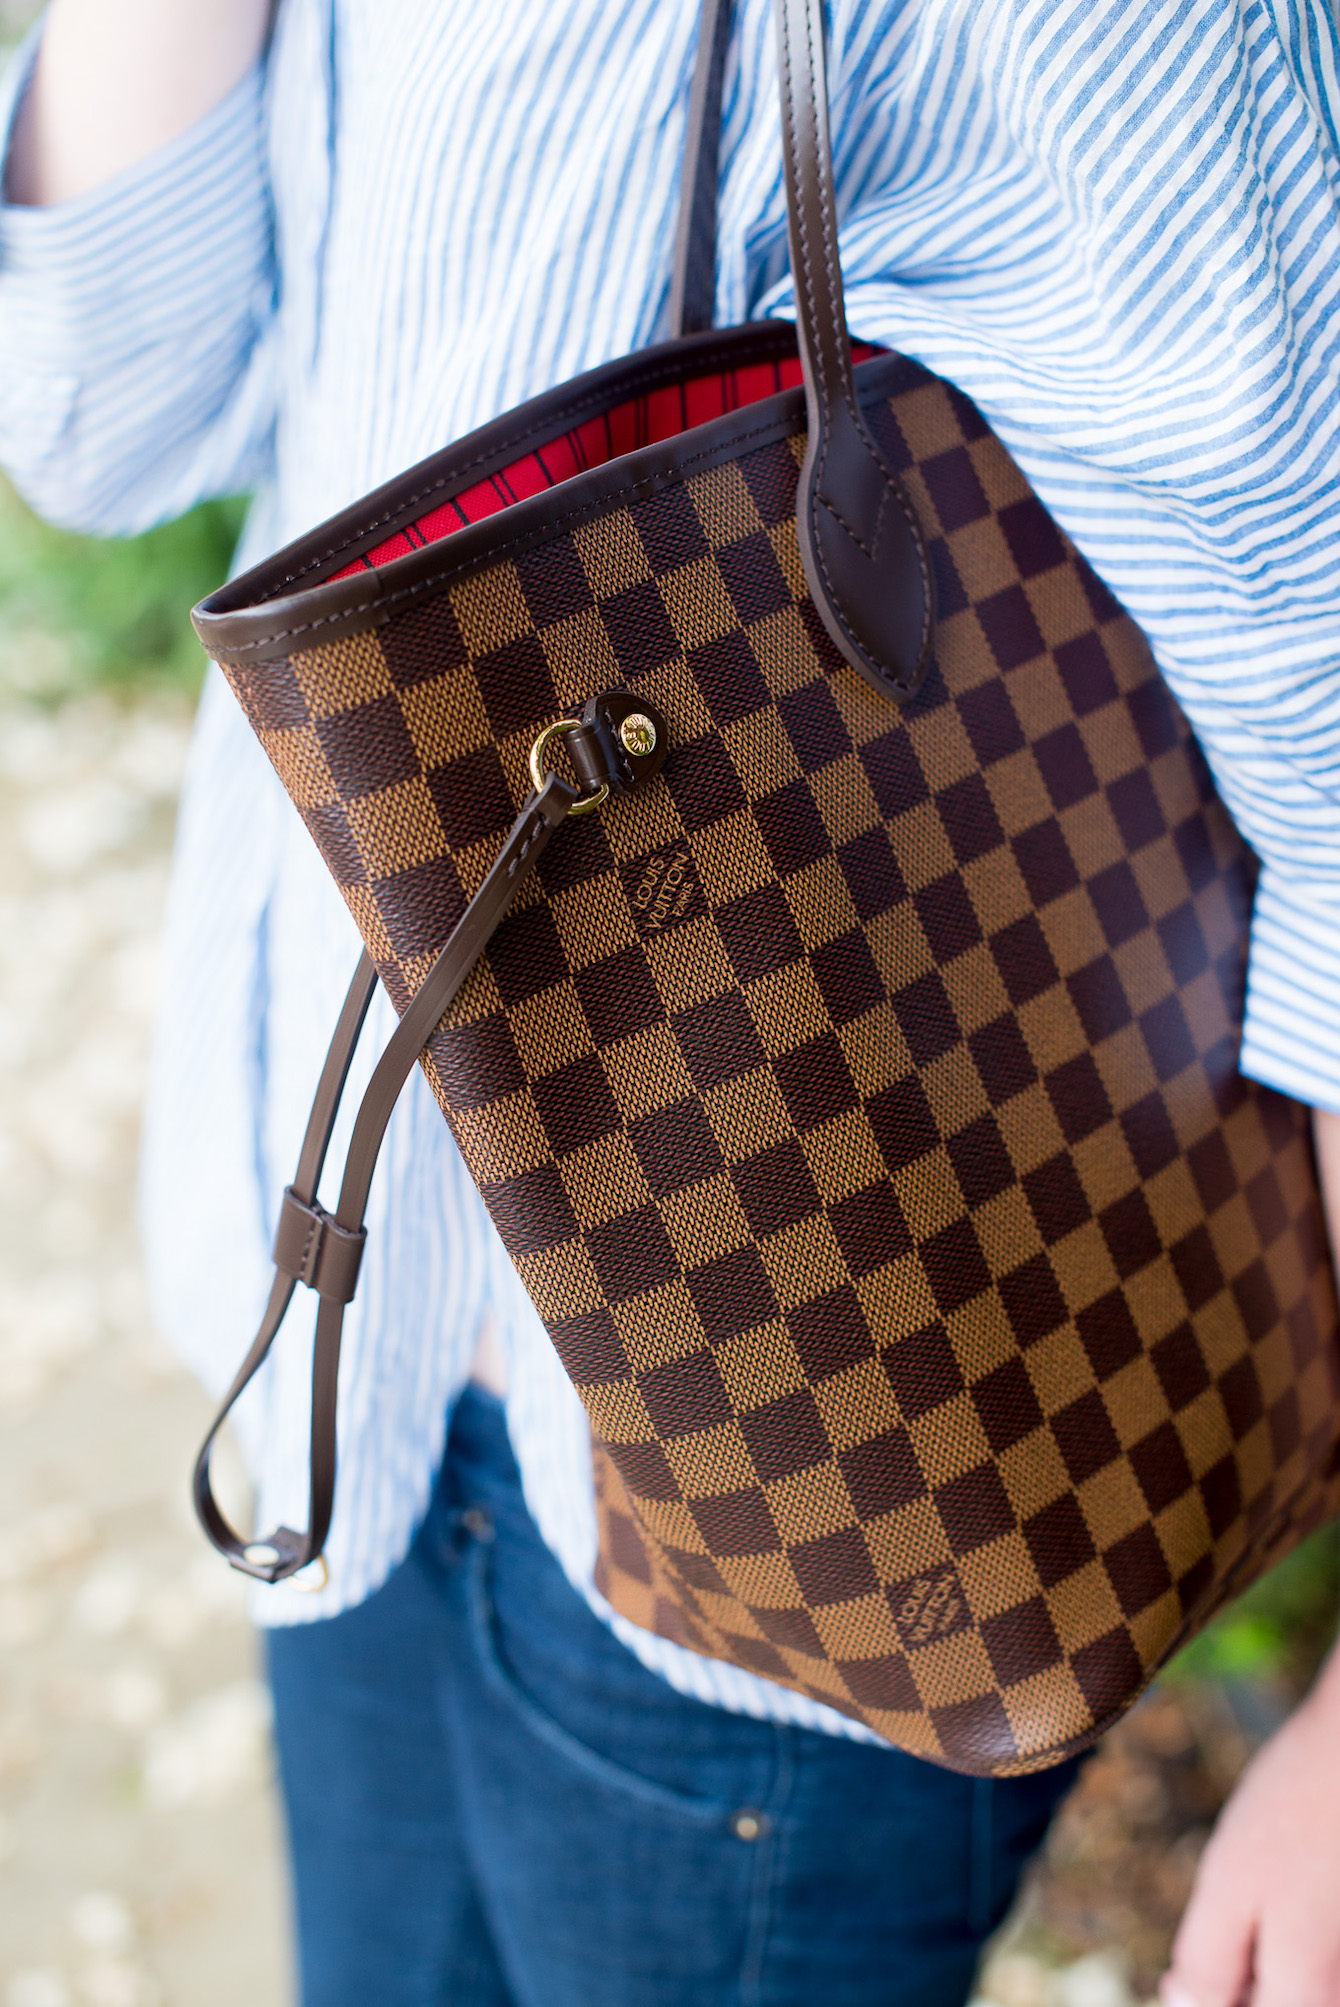 I love pockets and sippers and the Louis Vuitton Totally MM in damier